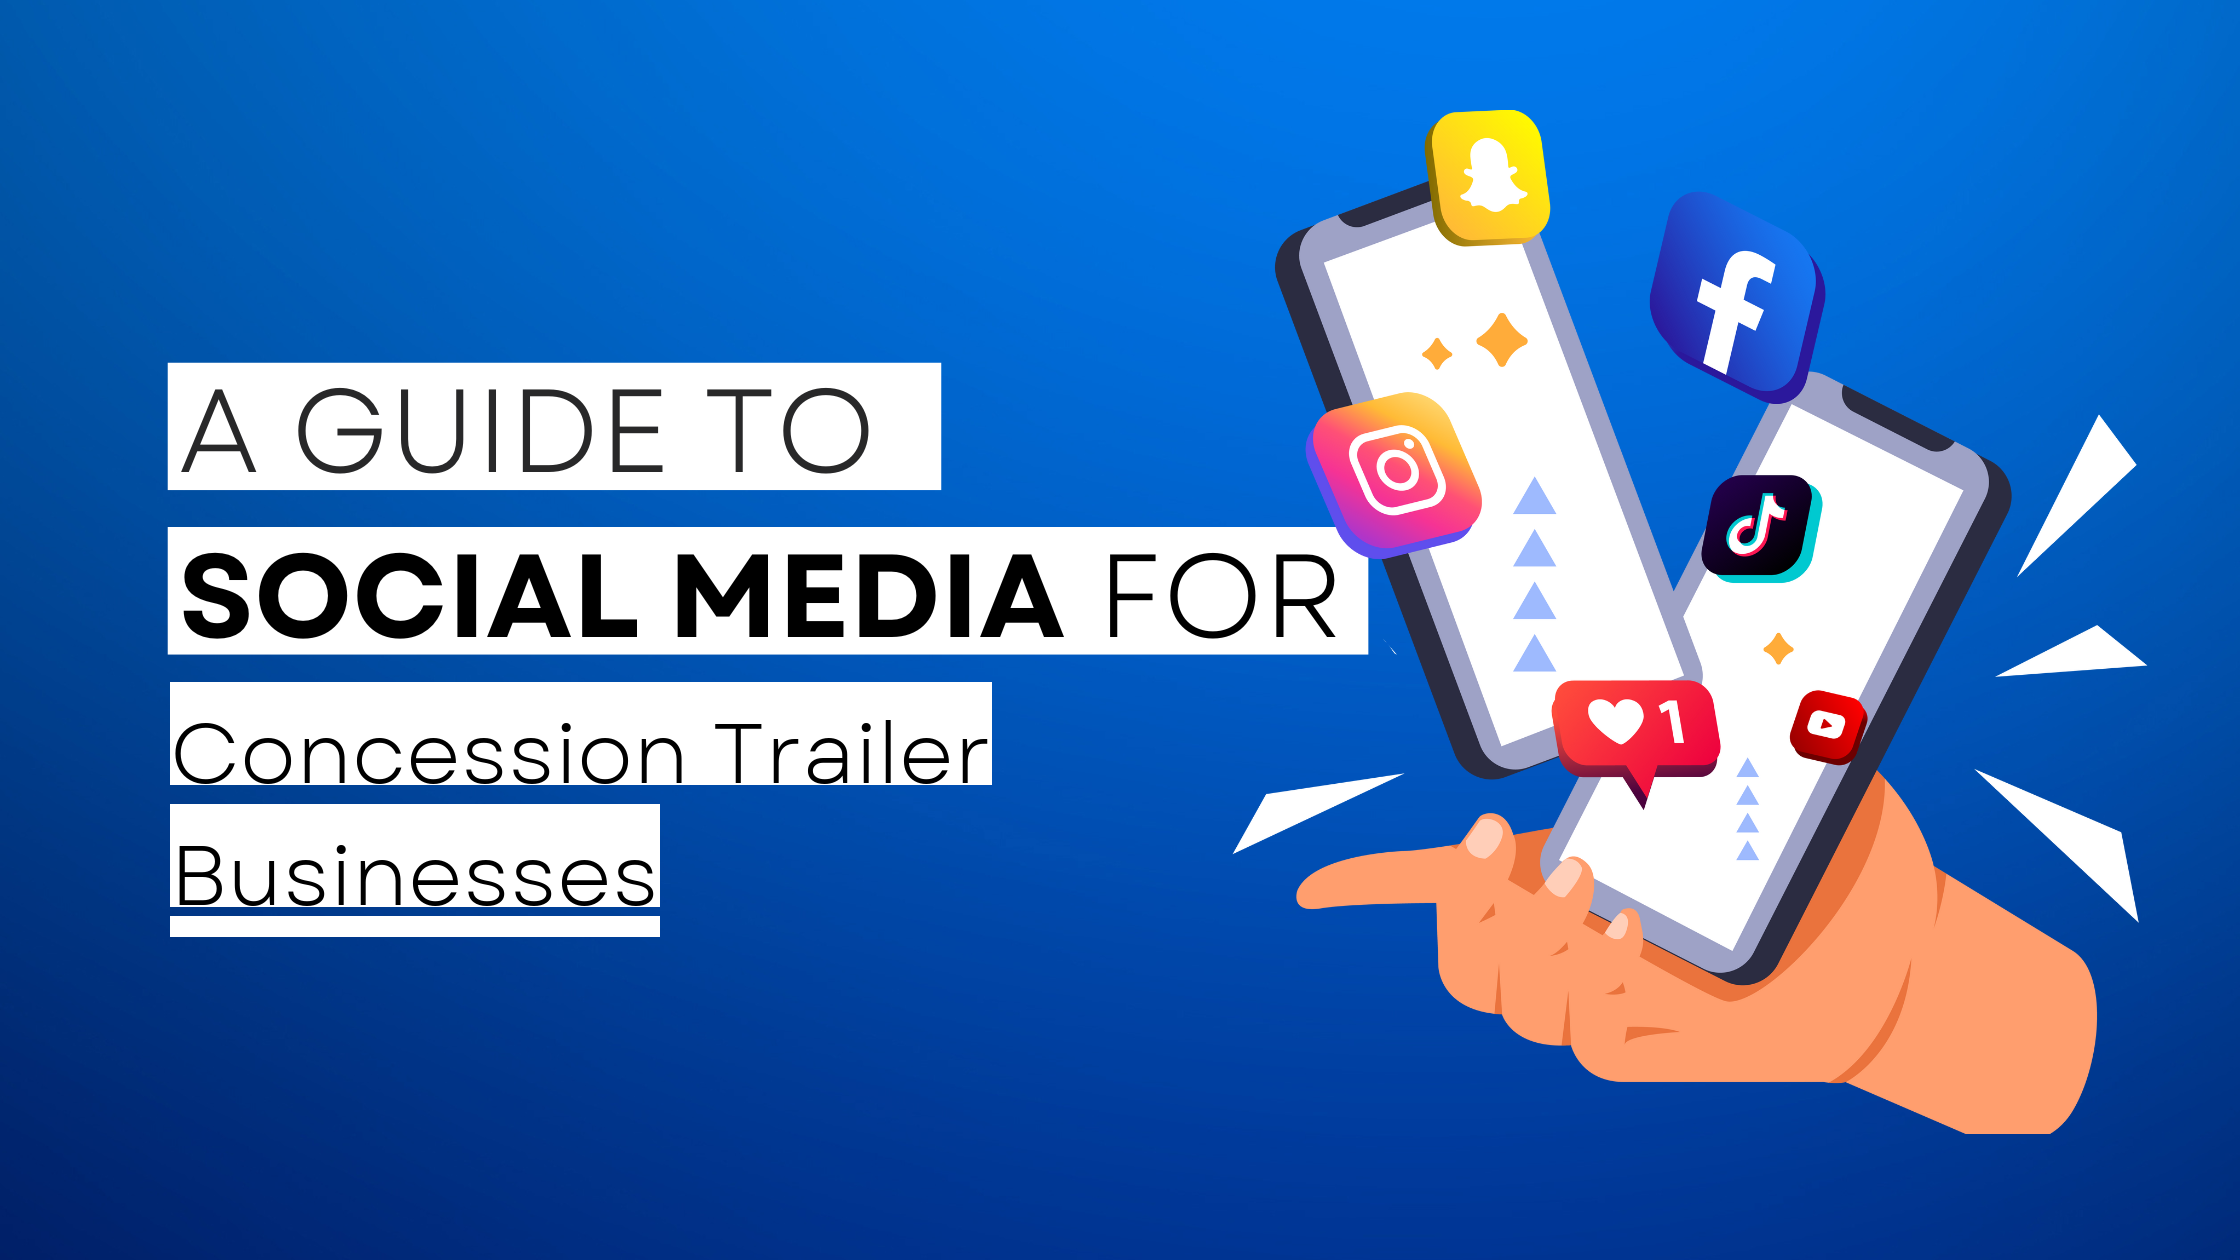 How to start Concession Trailer on social media